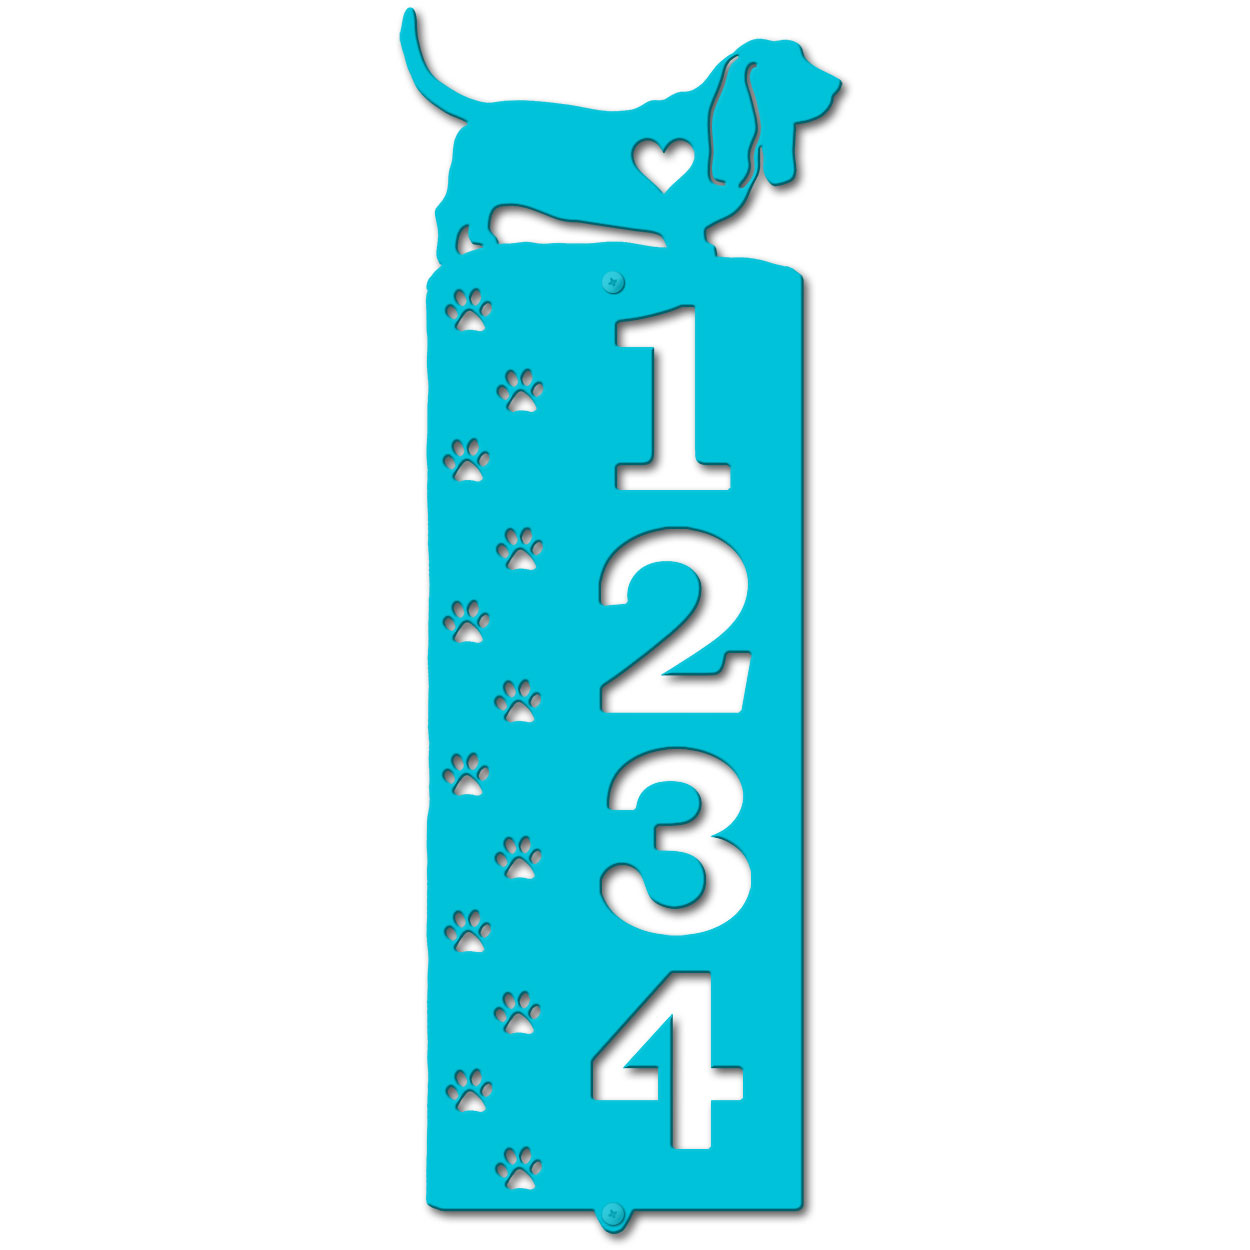 636144 - Basset Hound Cut Outs Four Digit Address Number Plaque